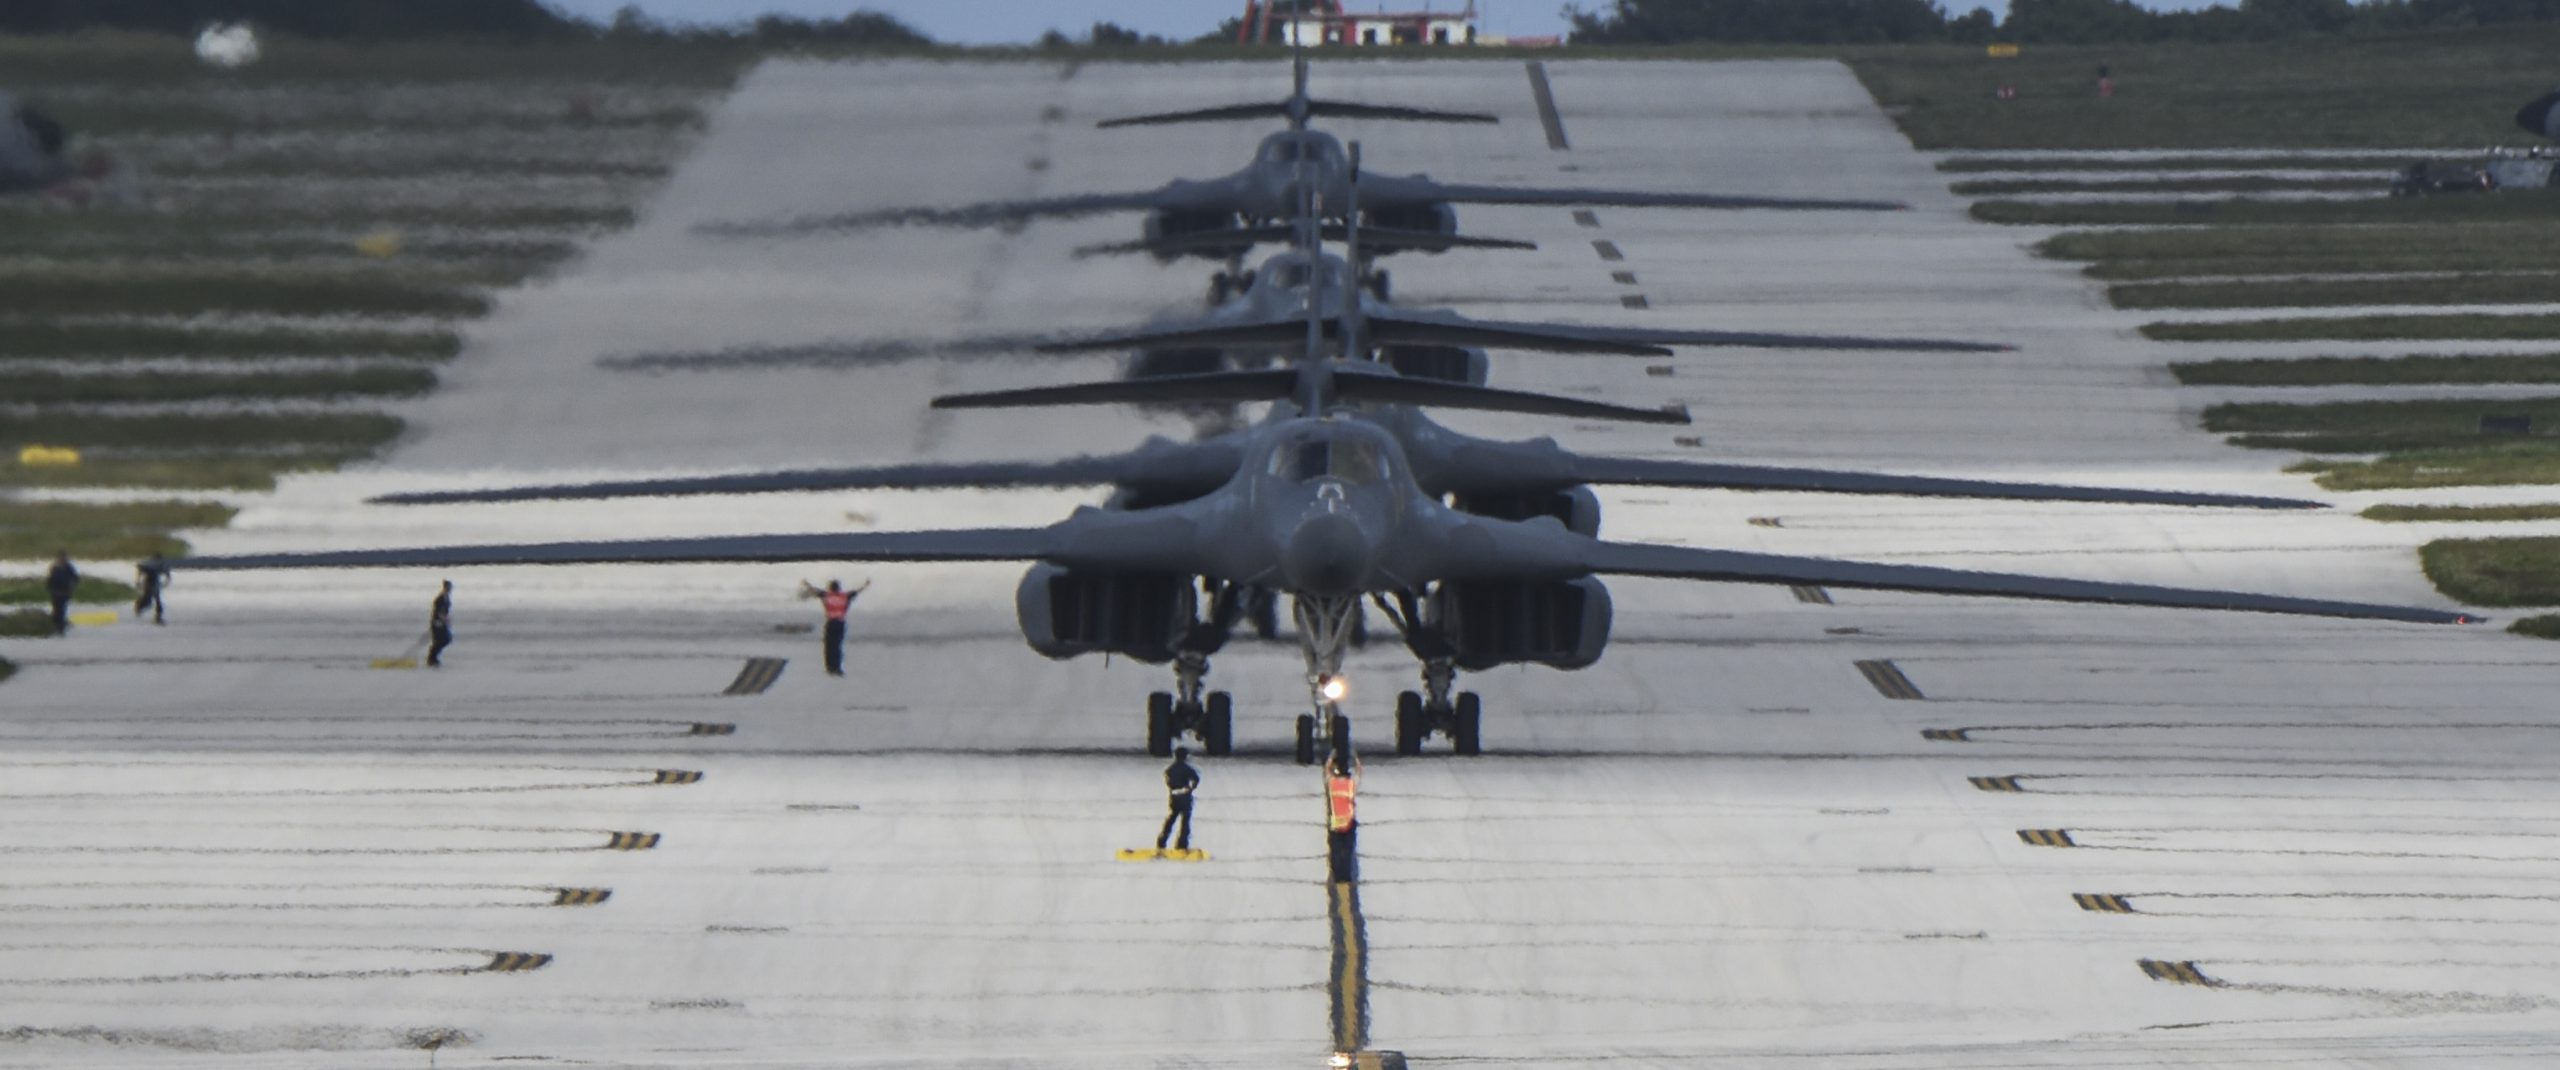 Four U.S. Air Force B-1B Lancer bombers assigned to the 9th Expeditionary Bomb Squadron deployed from Dyess Air Force Base, Texas, arrive at Andersen Air Force Base, Guam, Feb. 6, 2017. The 9th EBS is taking over U.S. Pacific Command’s continuous bomber presence operations. Air Force photo by Tech. Sgt. Richard P. Ebensberger. -